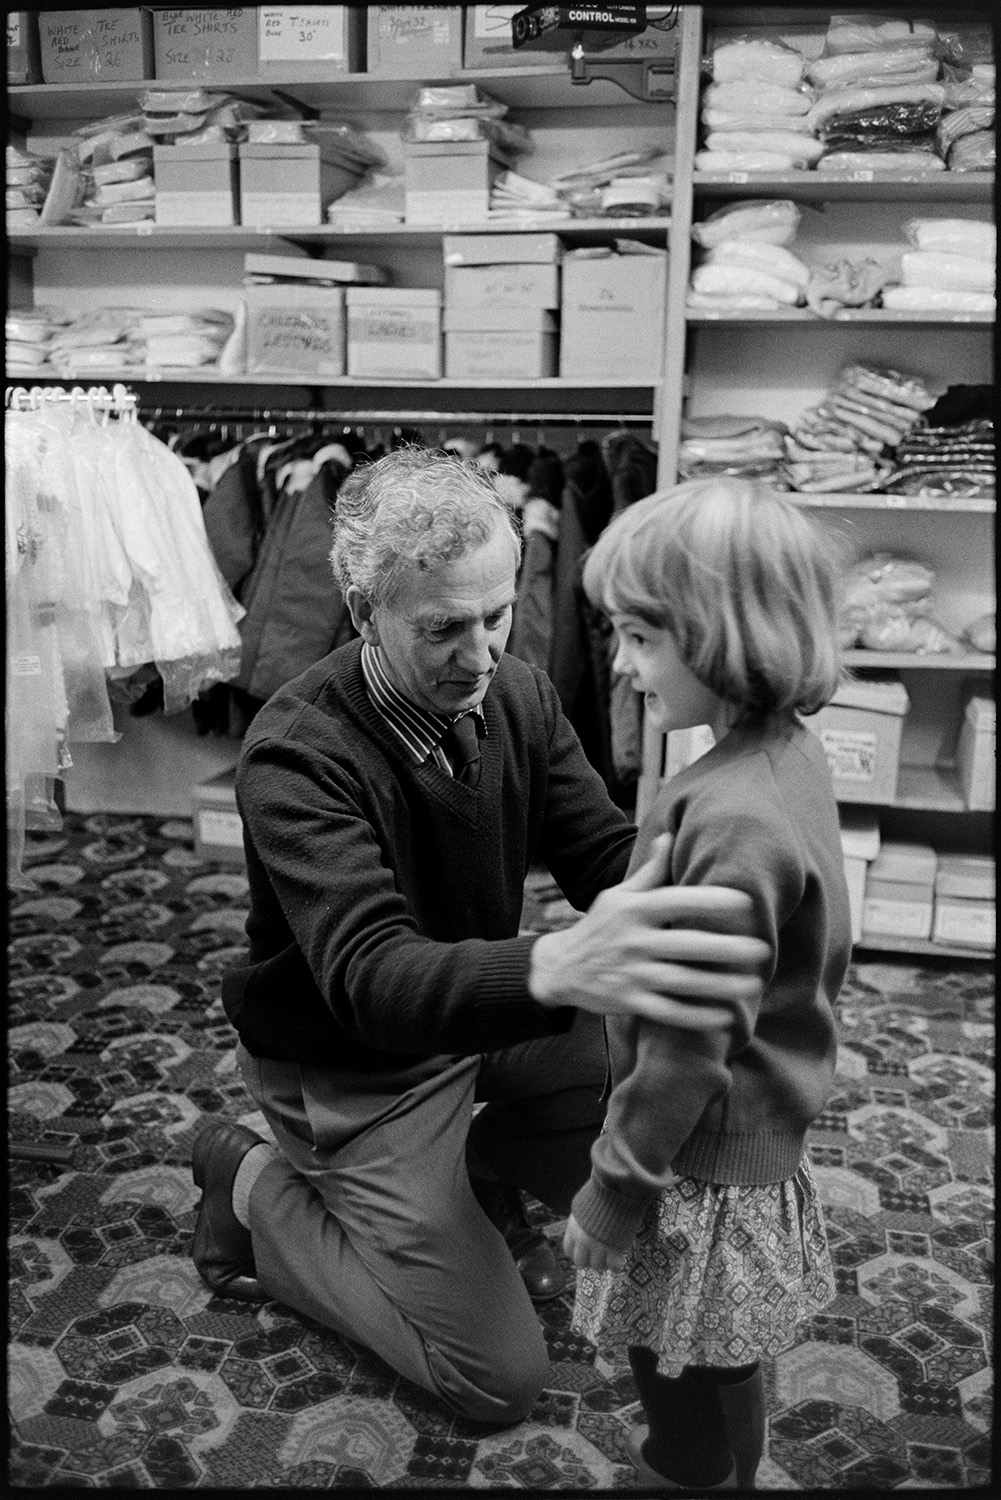 Mother and child buying clothes.
[Ella Ravilious trying on clothes at Singh's clothes shop at South Street, Torrington. A man, possibly the shop manager, is assisting her. Shelves with clothing, shoeboxes and a clothes rails are visible in the background. They are stood on a patterned carpet.]